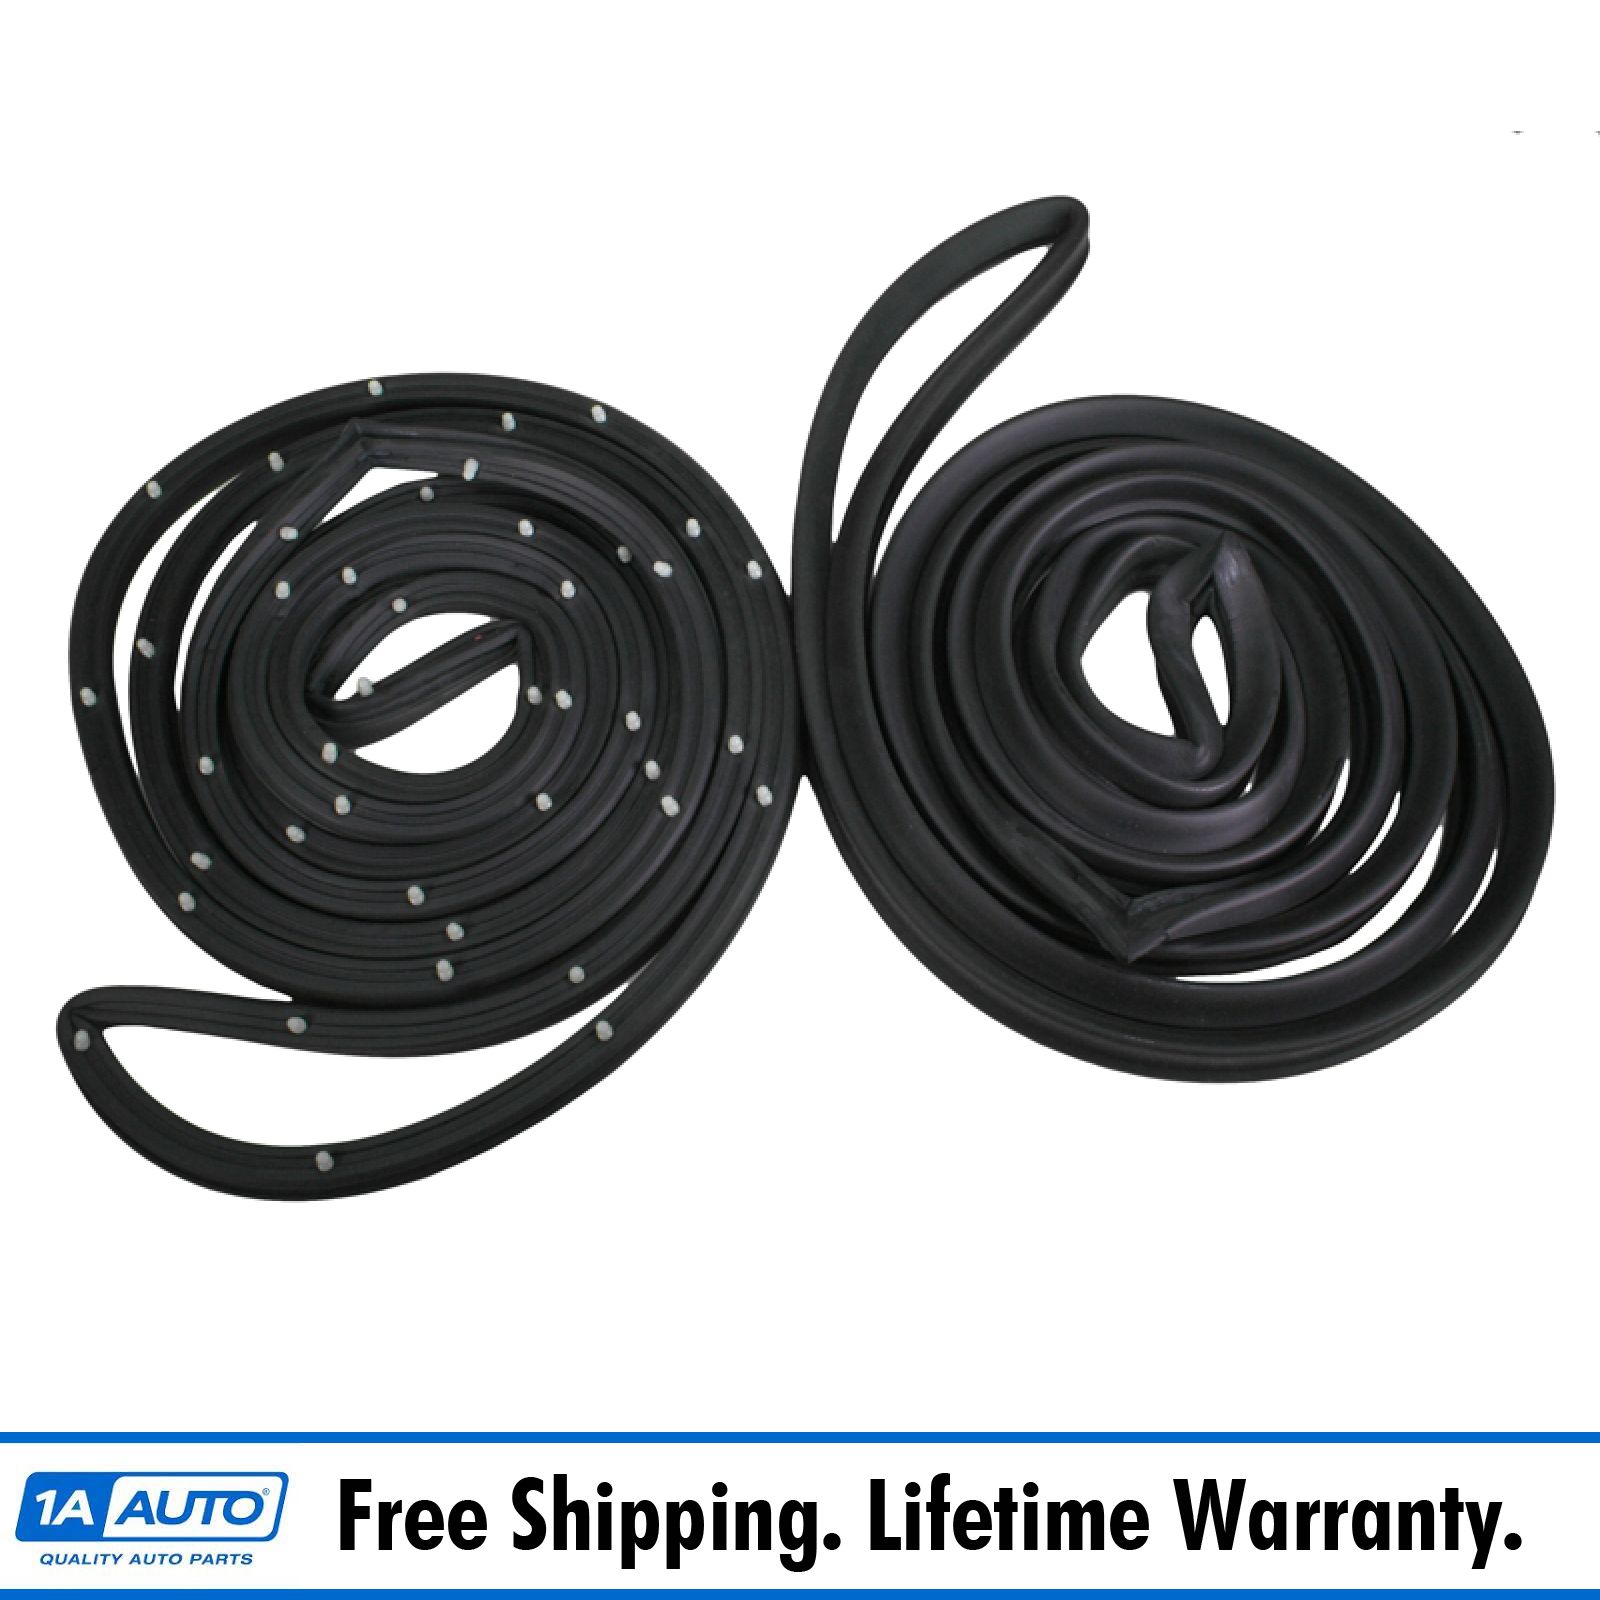 Details About Door Weatherstrip Seal For 55 59 Chevy Truck Suburban